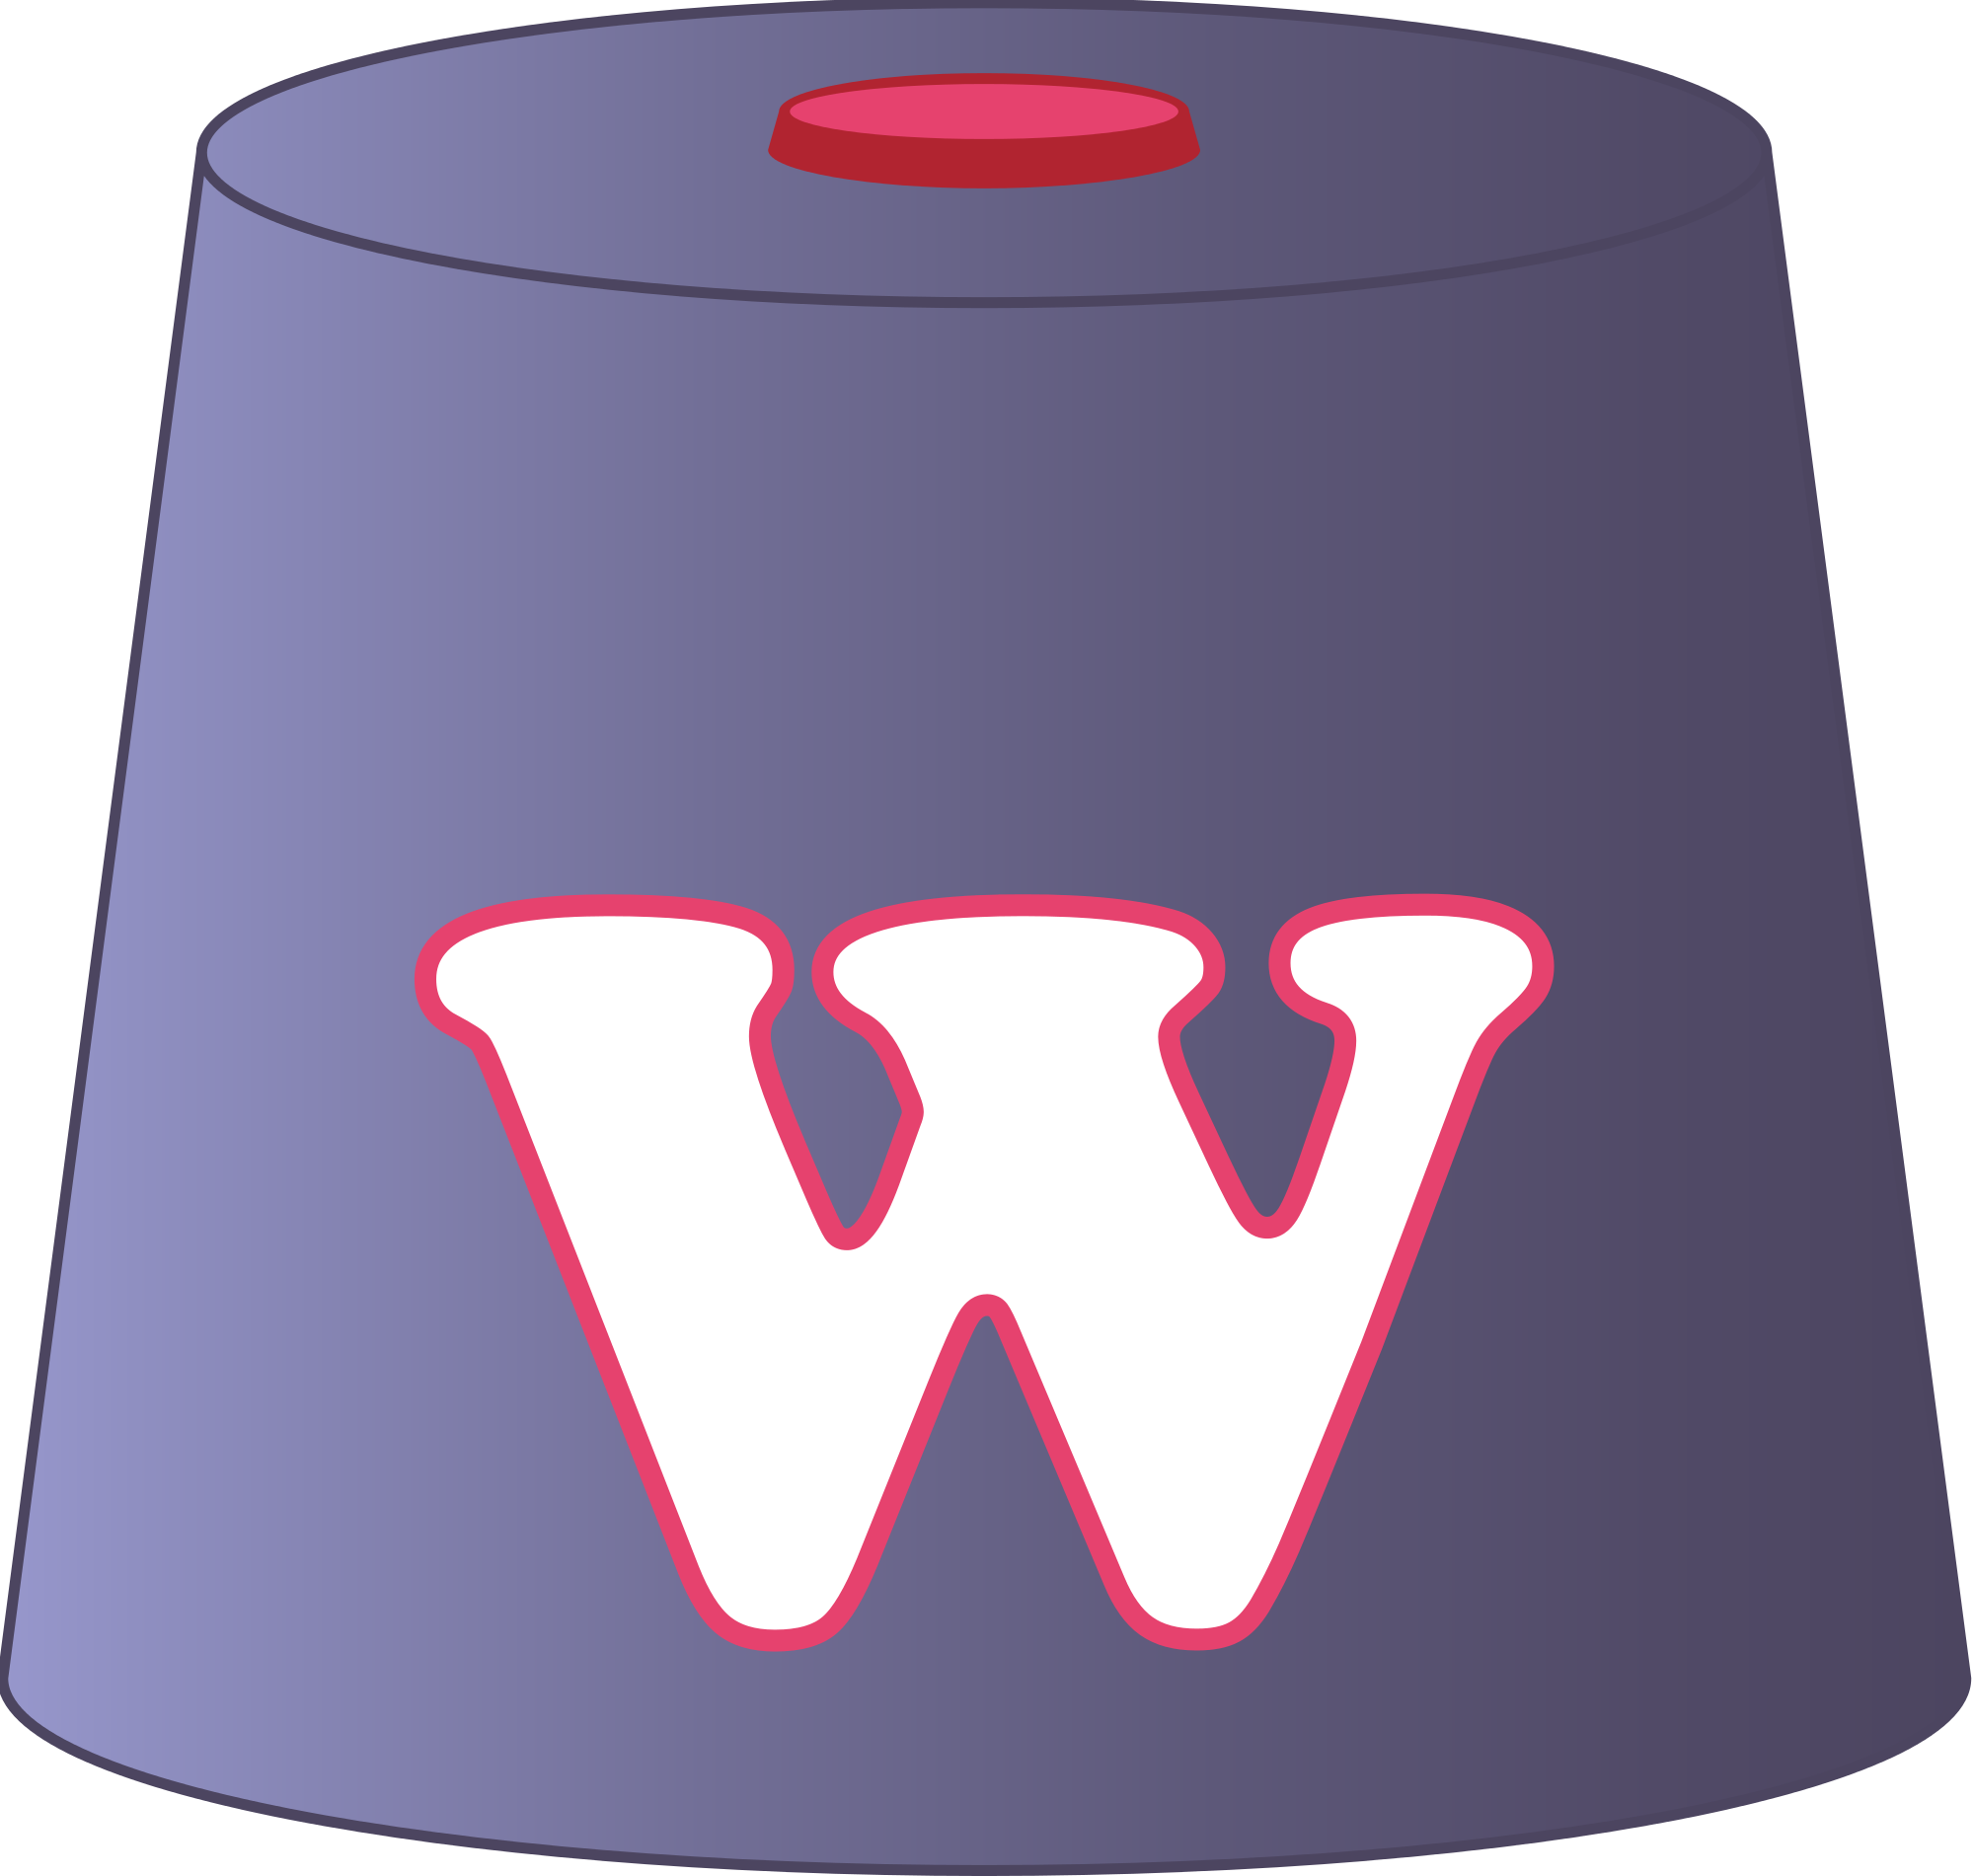 A Blue Cylinder With A White W On It